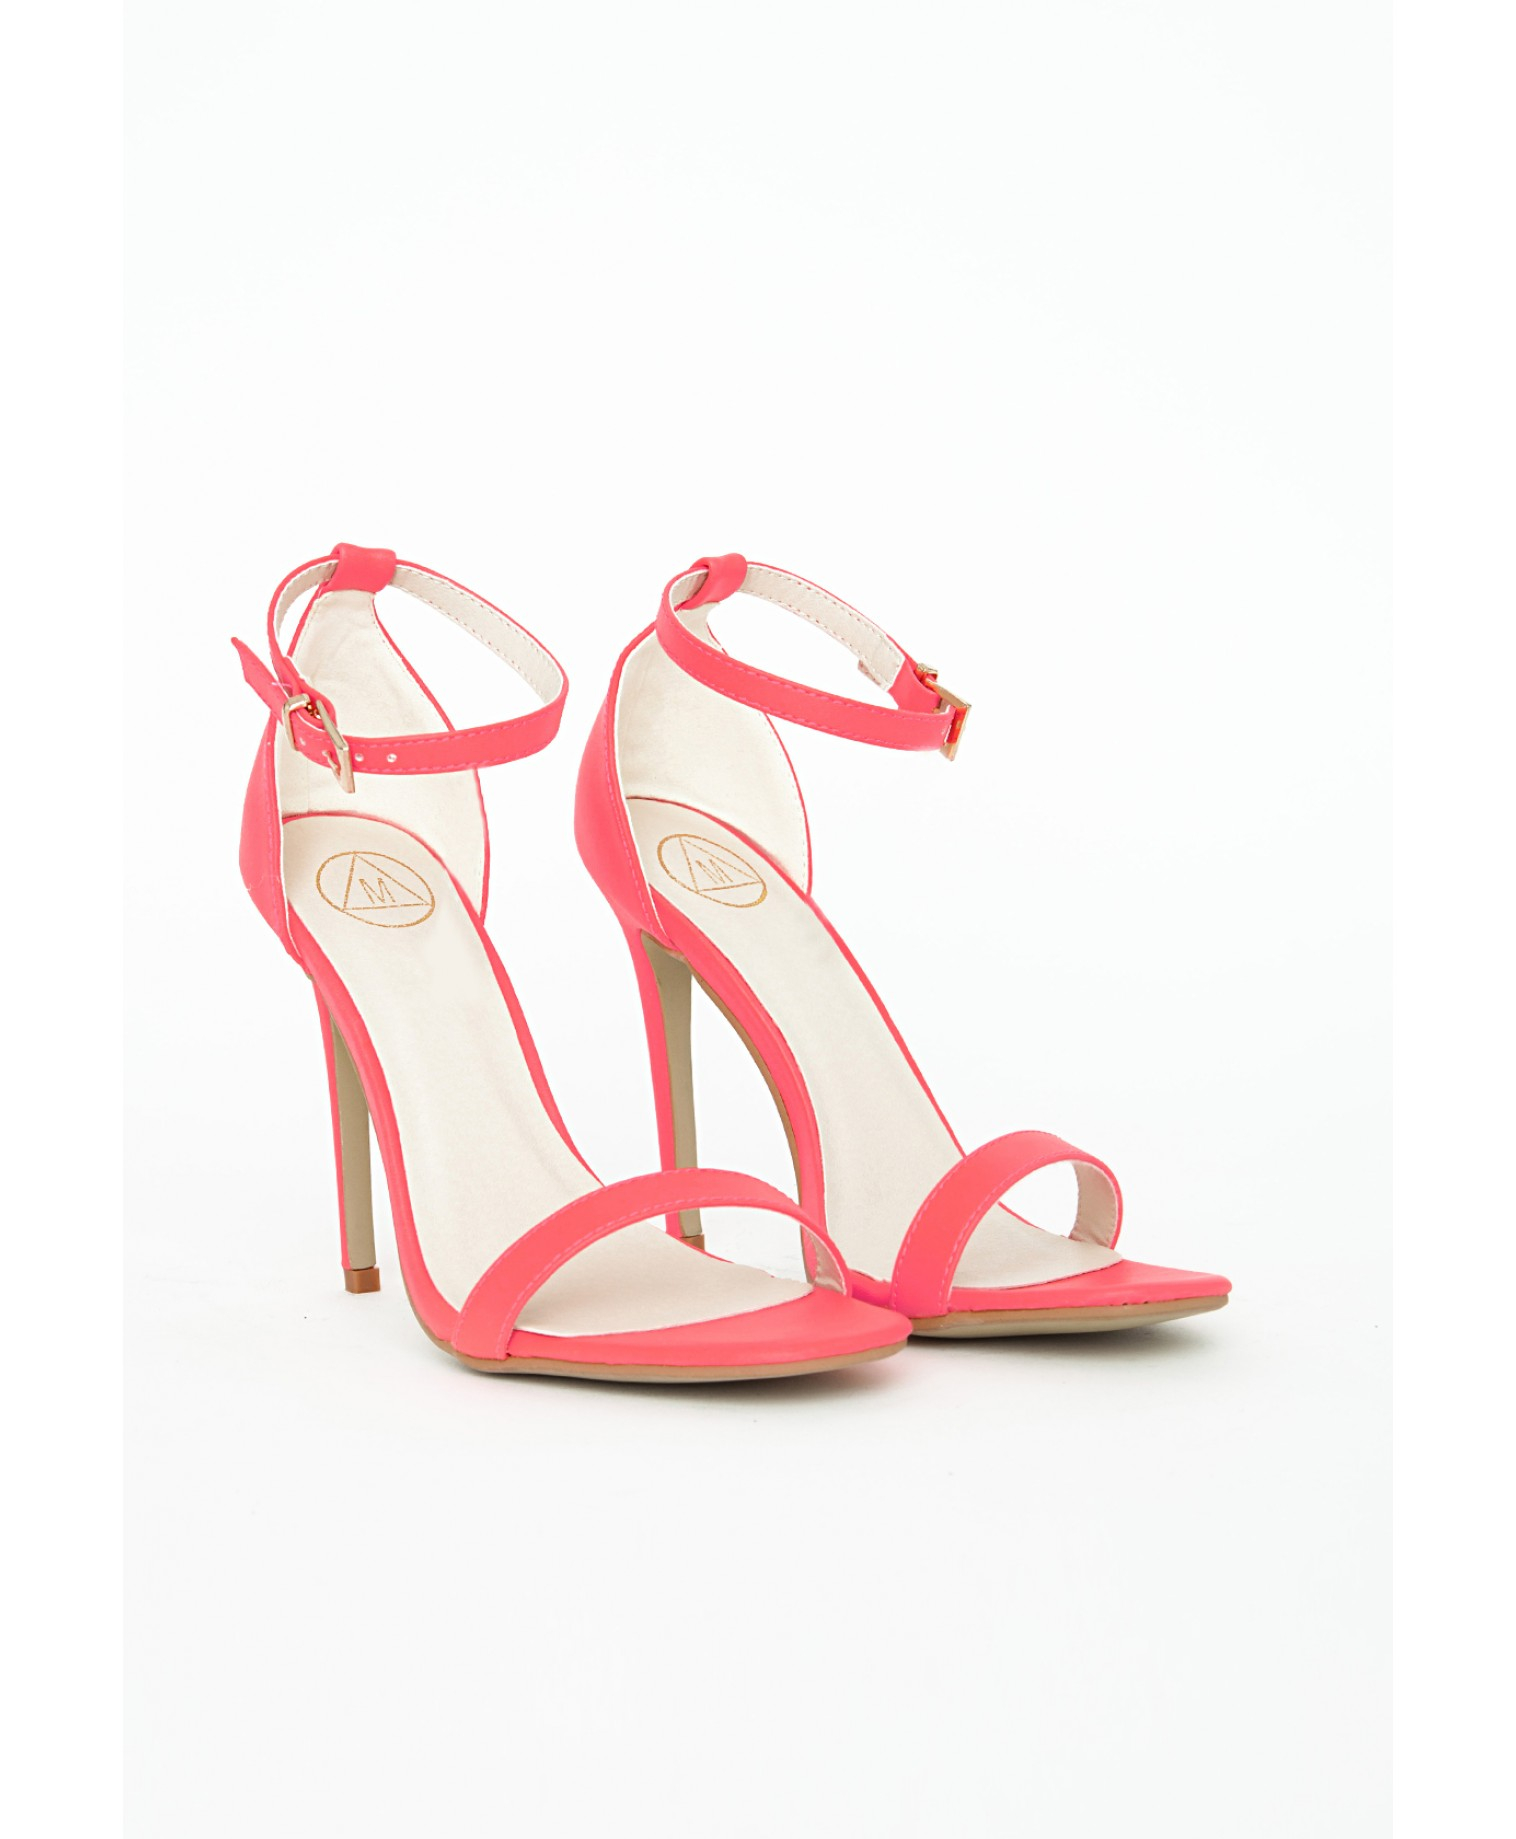 Missguided Clara Neon Coral Strappy Heeled Sandals in Pink | Lyst